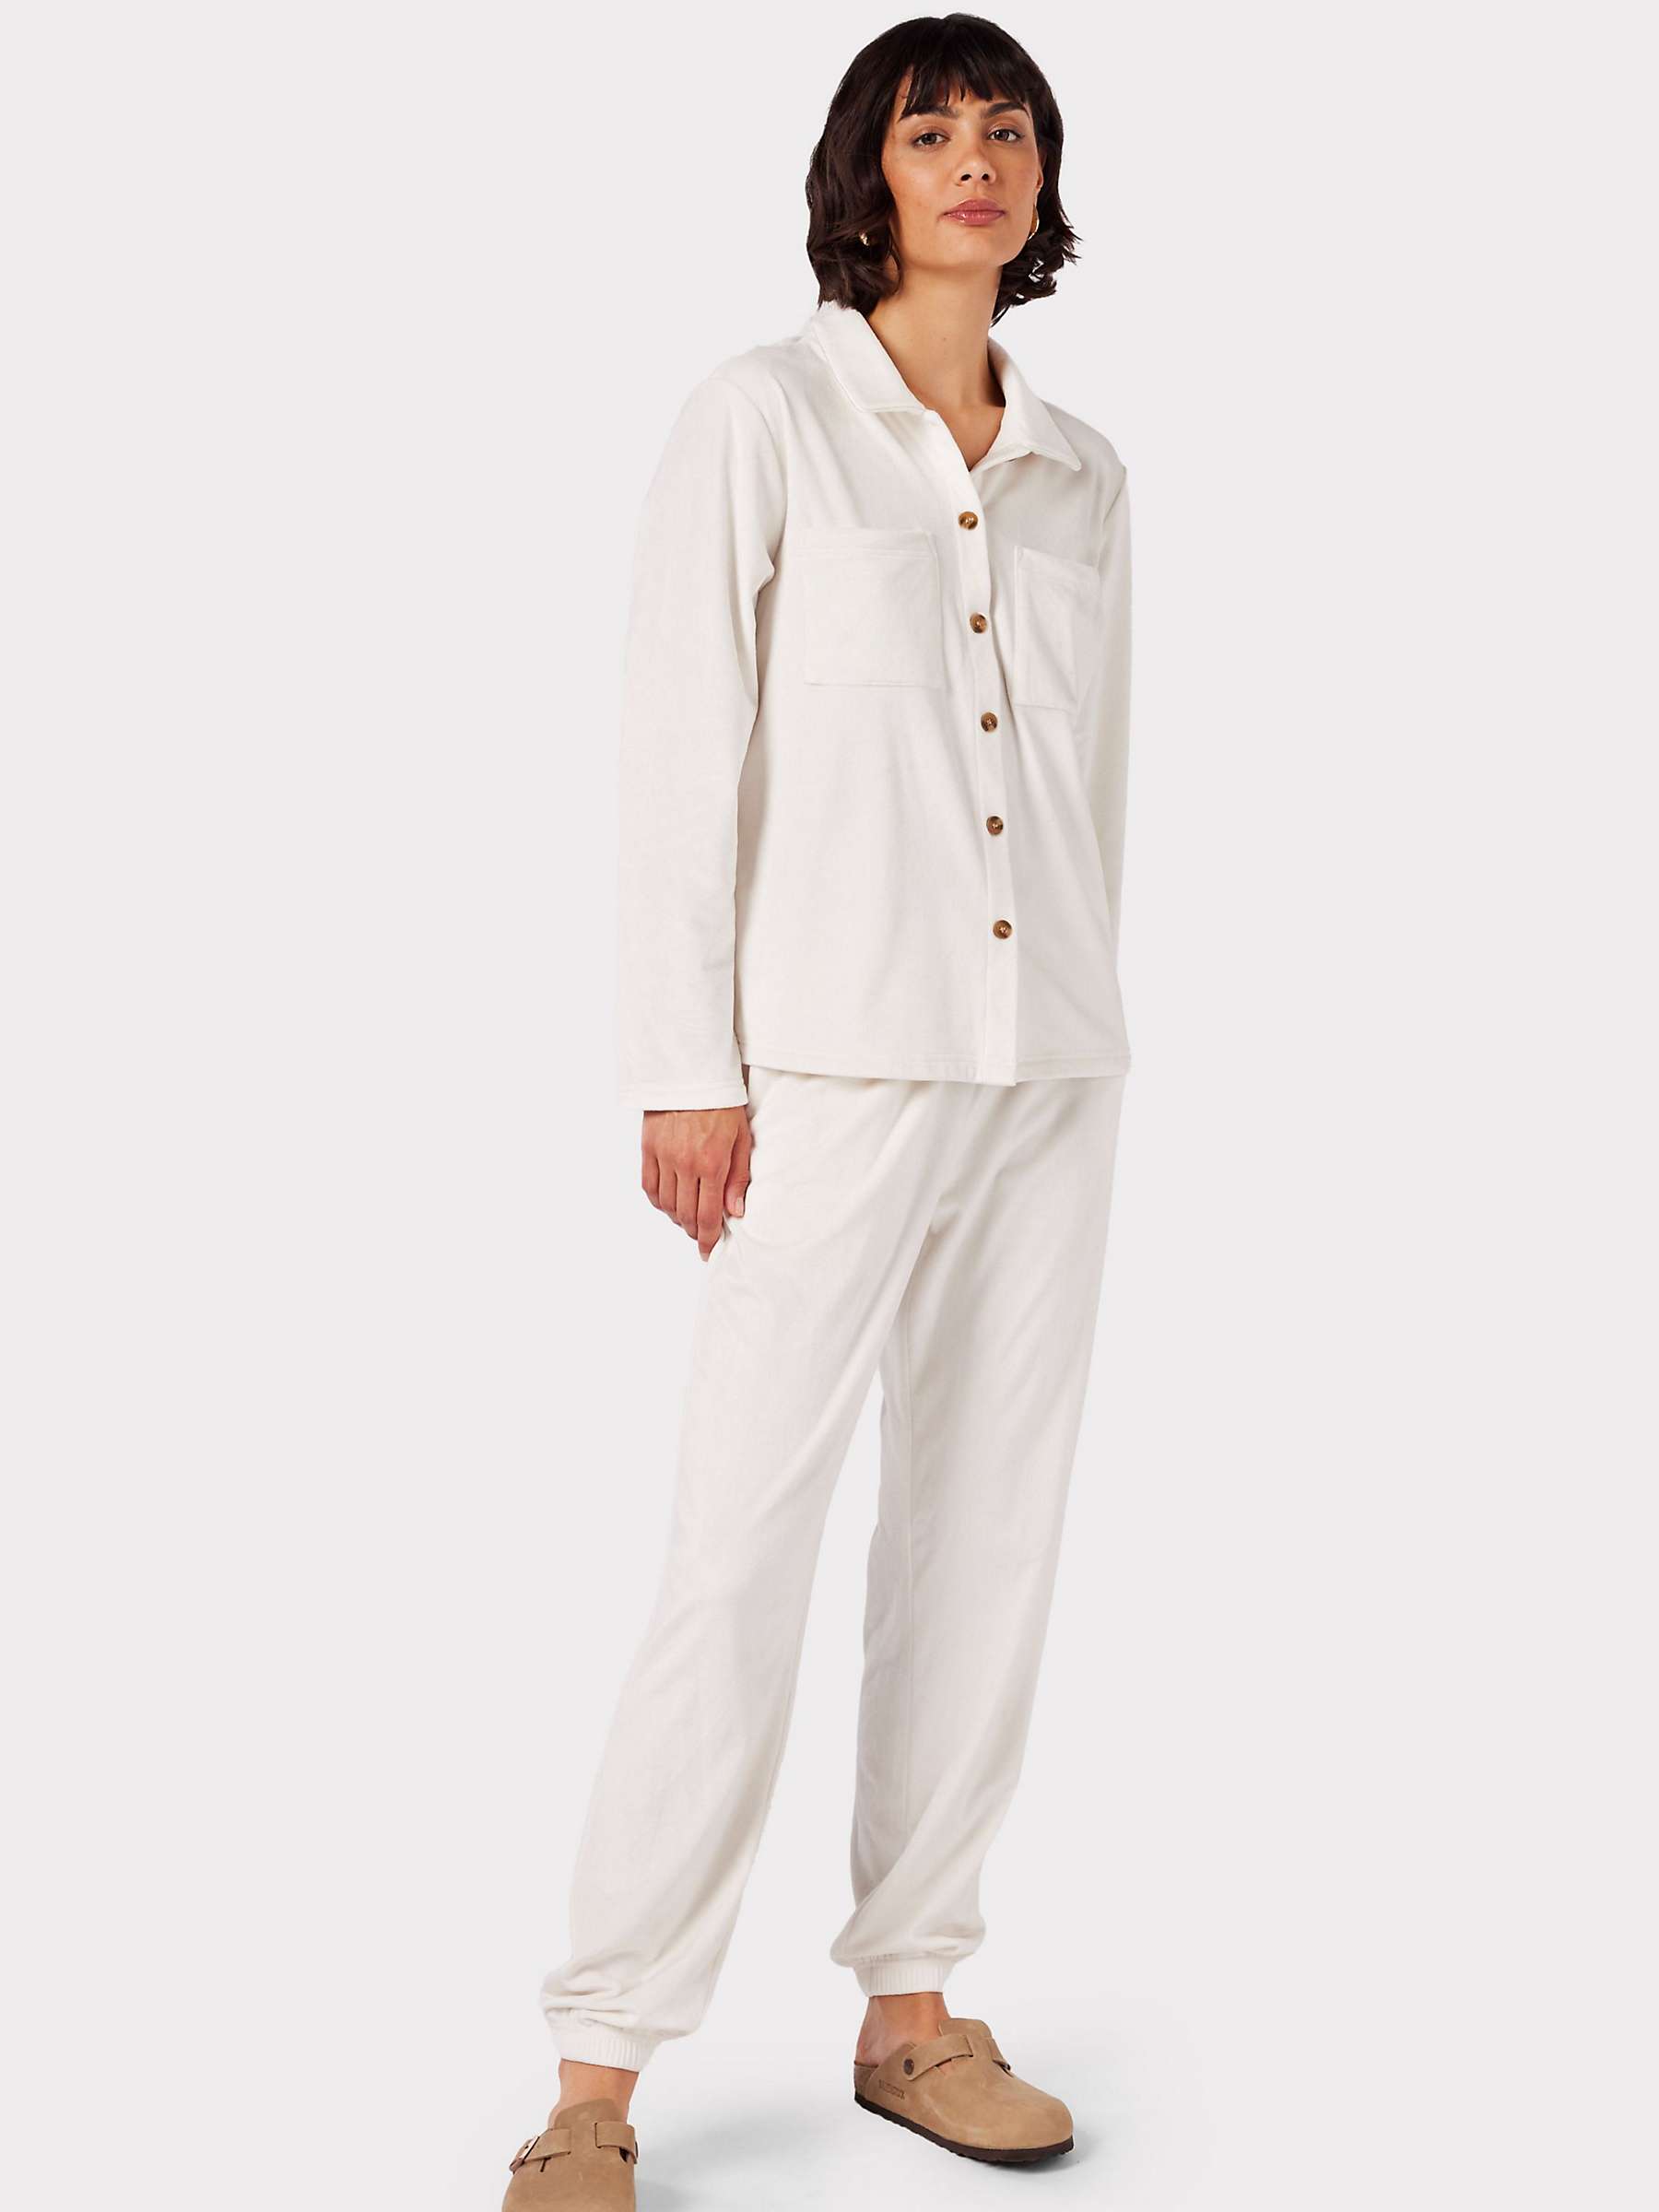 Chelsea Peers Velour Lounge Co-Ord Set, Off White at John Lewis & Partners